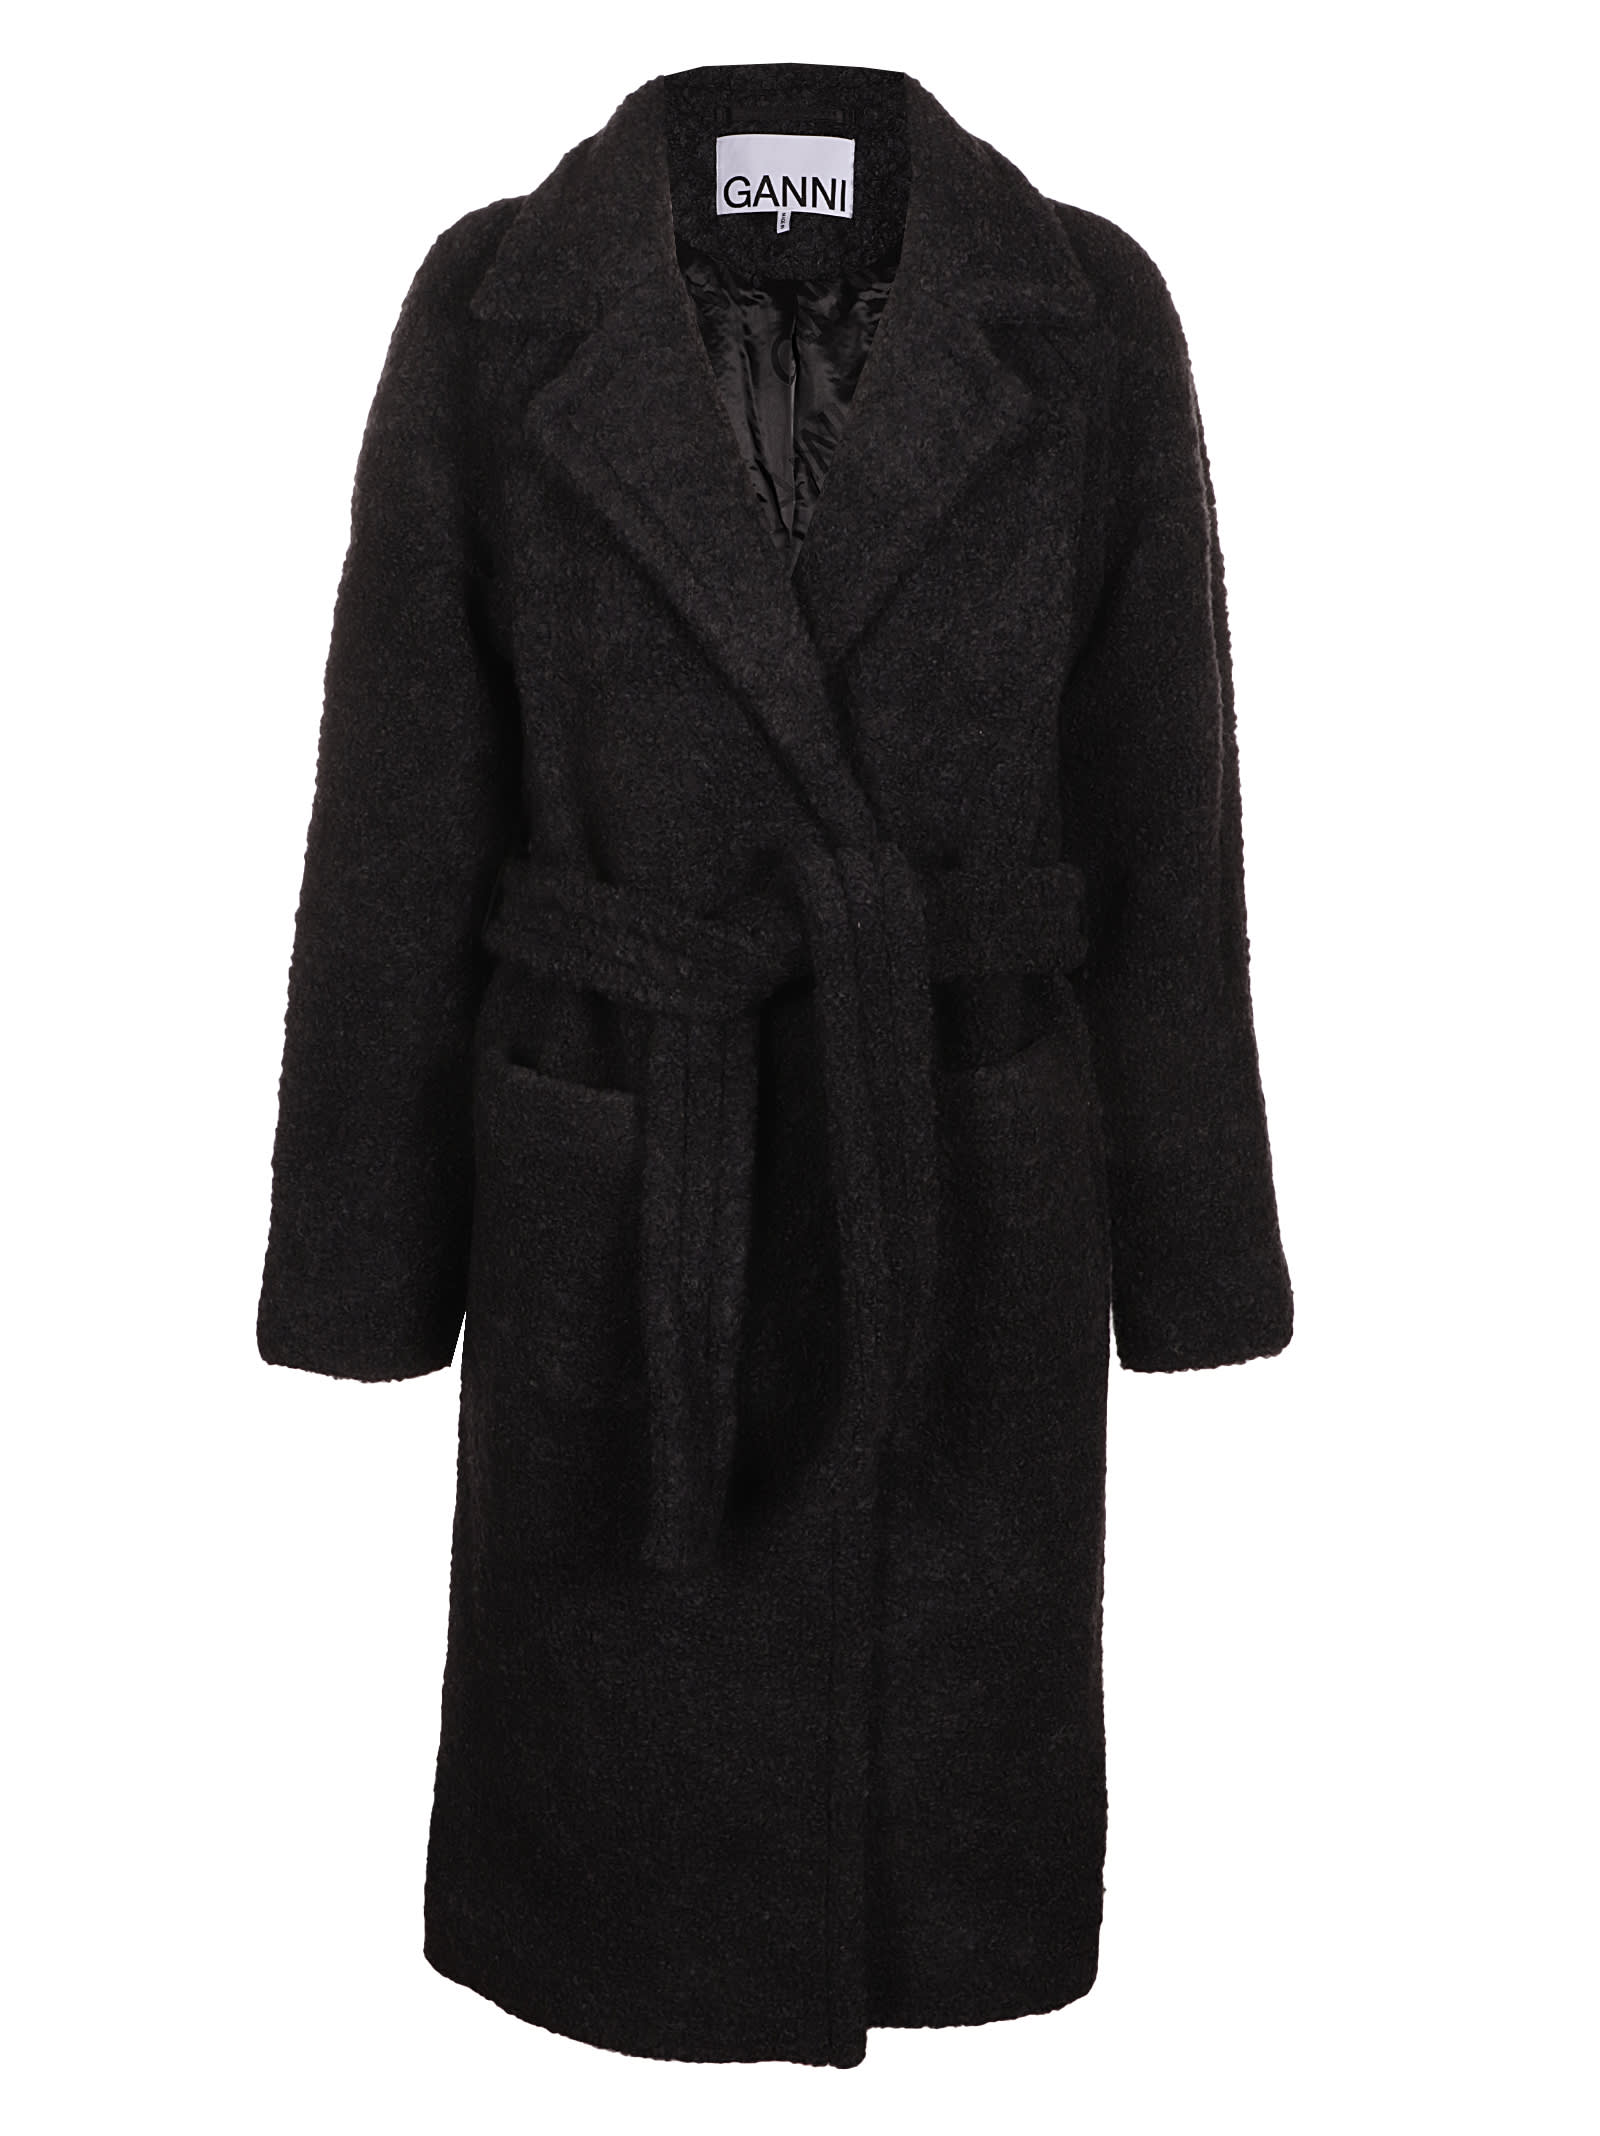 Women's GANNI Coats On Sale, Up To 70% Off | ModeSens